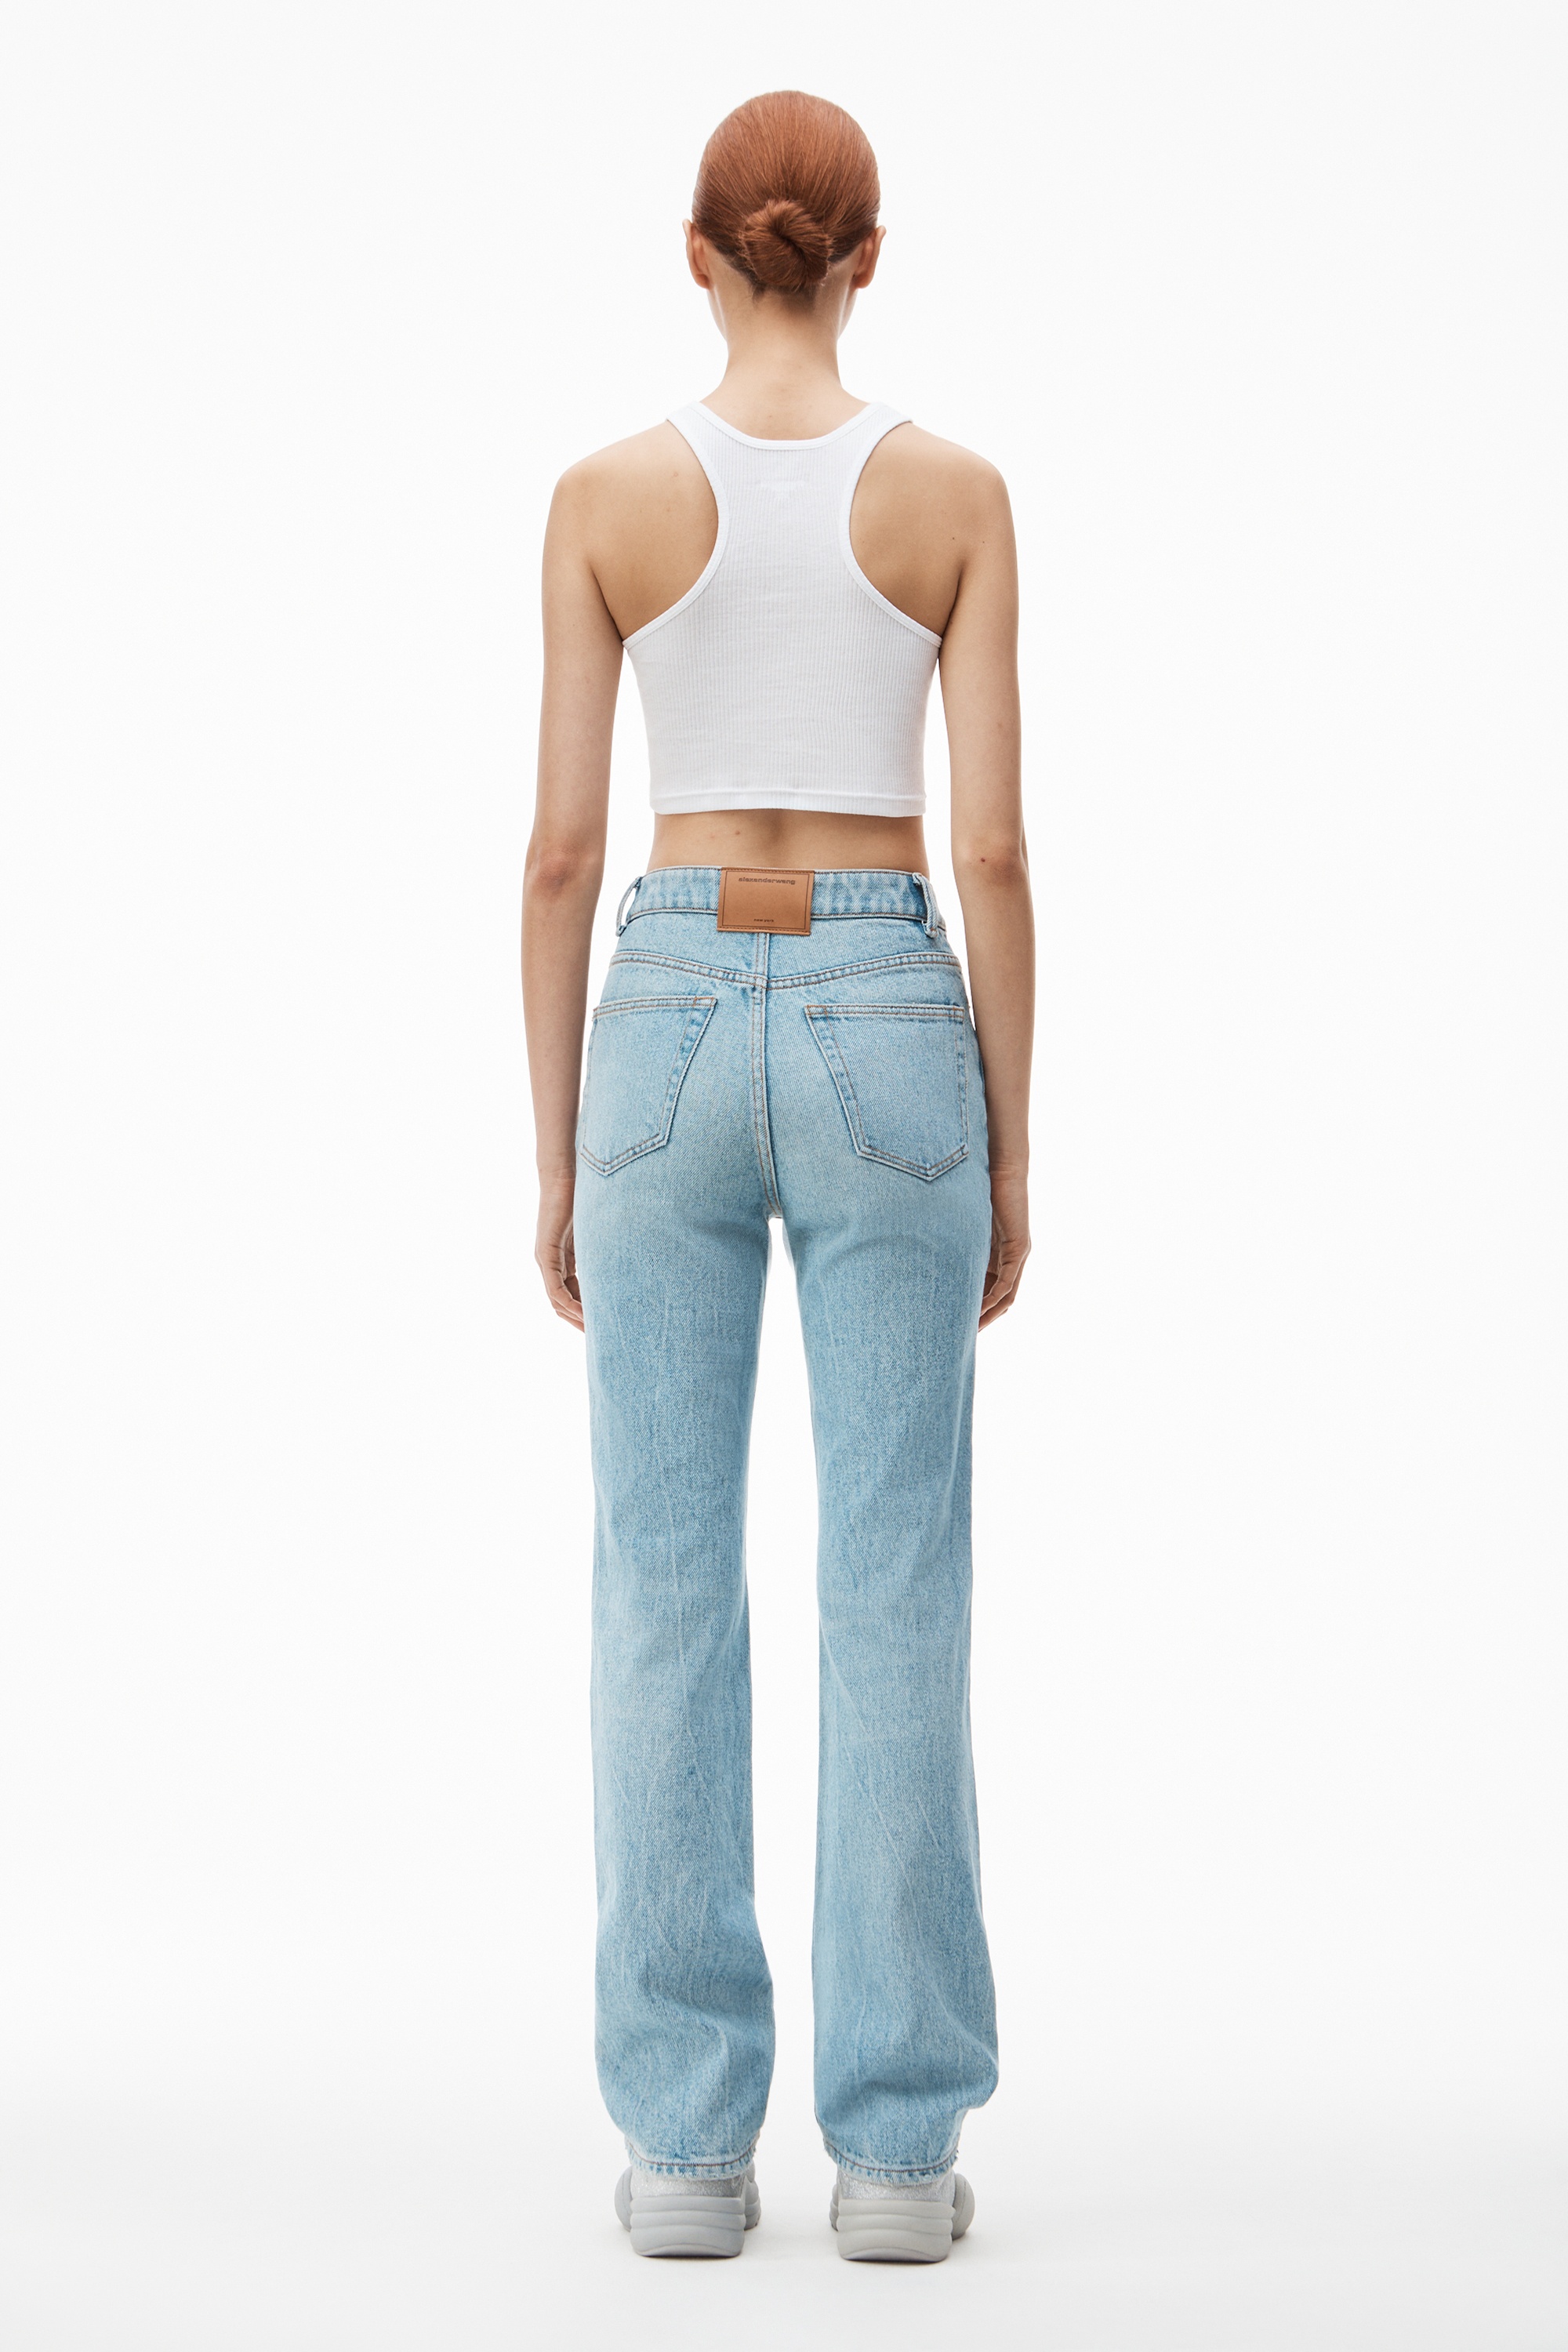 FLY HIGH-RISE STACKED JEAN IN DENIM - 4